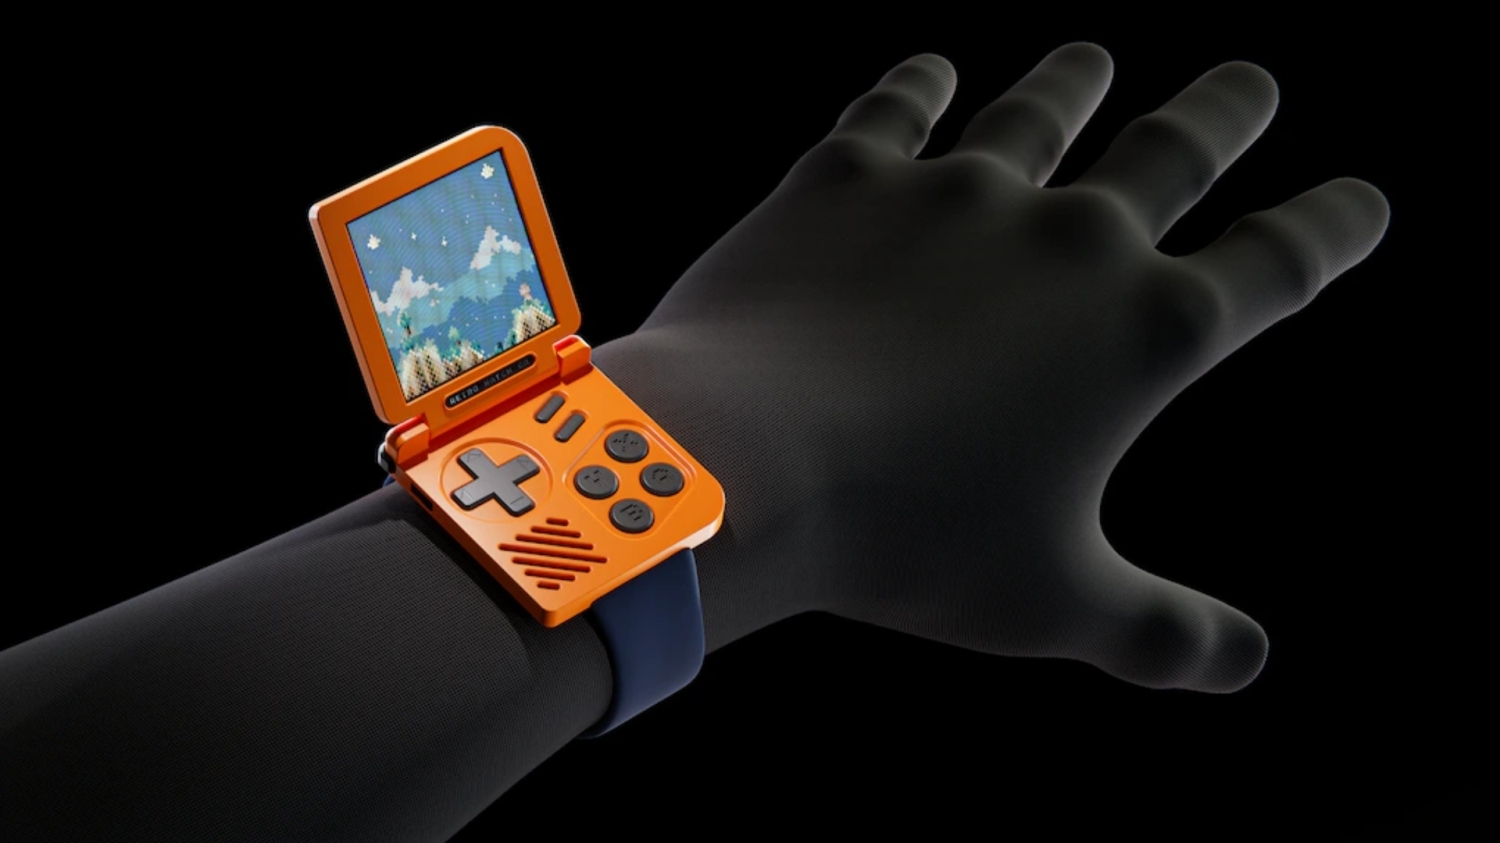 Retro Gaming Watch is a new smartwatch that flips open to deliver classic gaming goodness